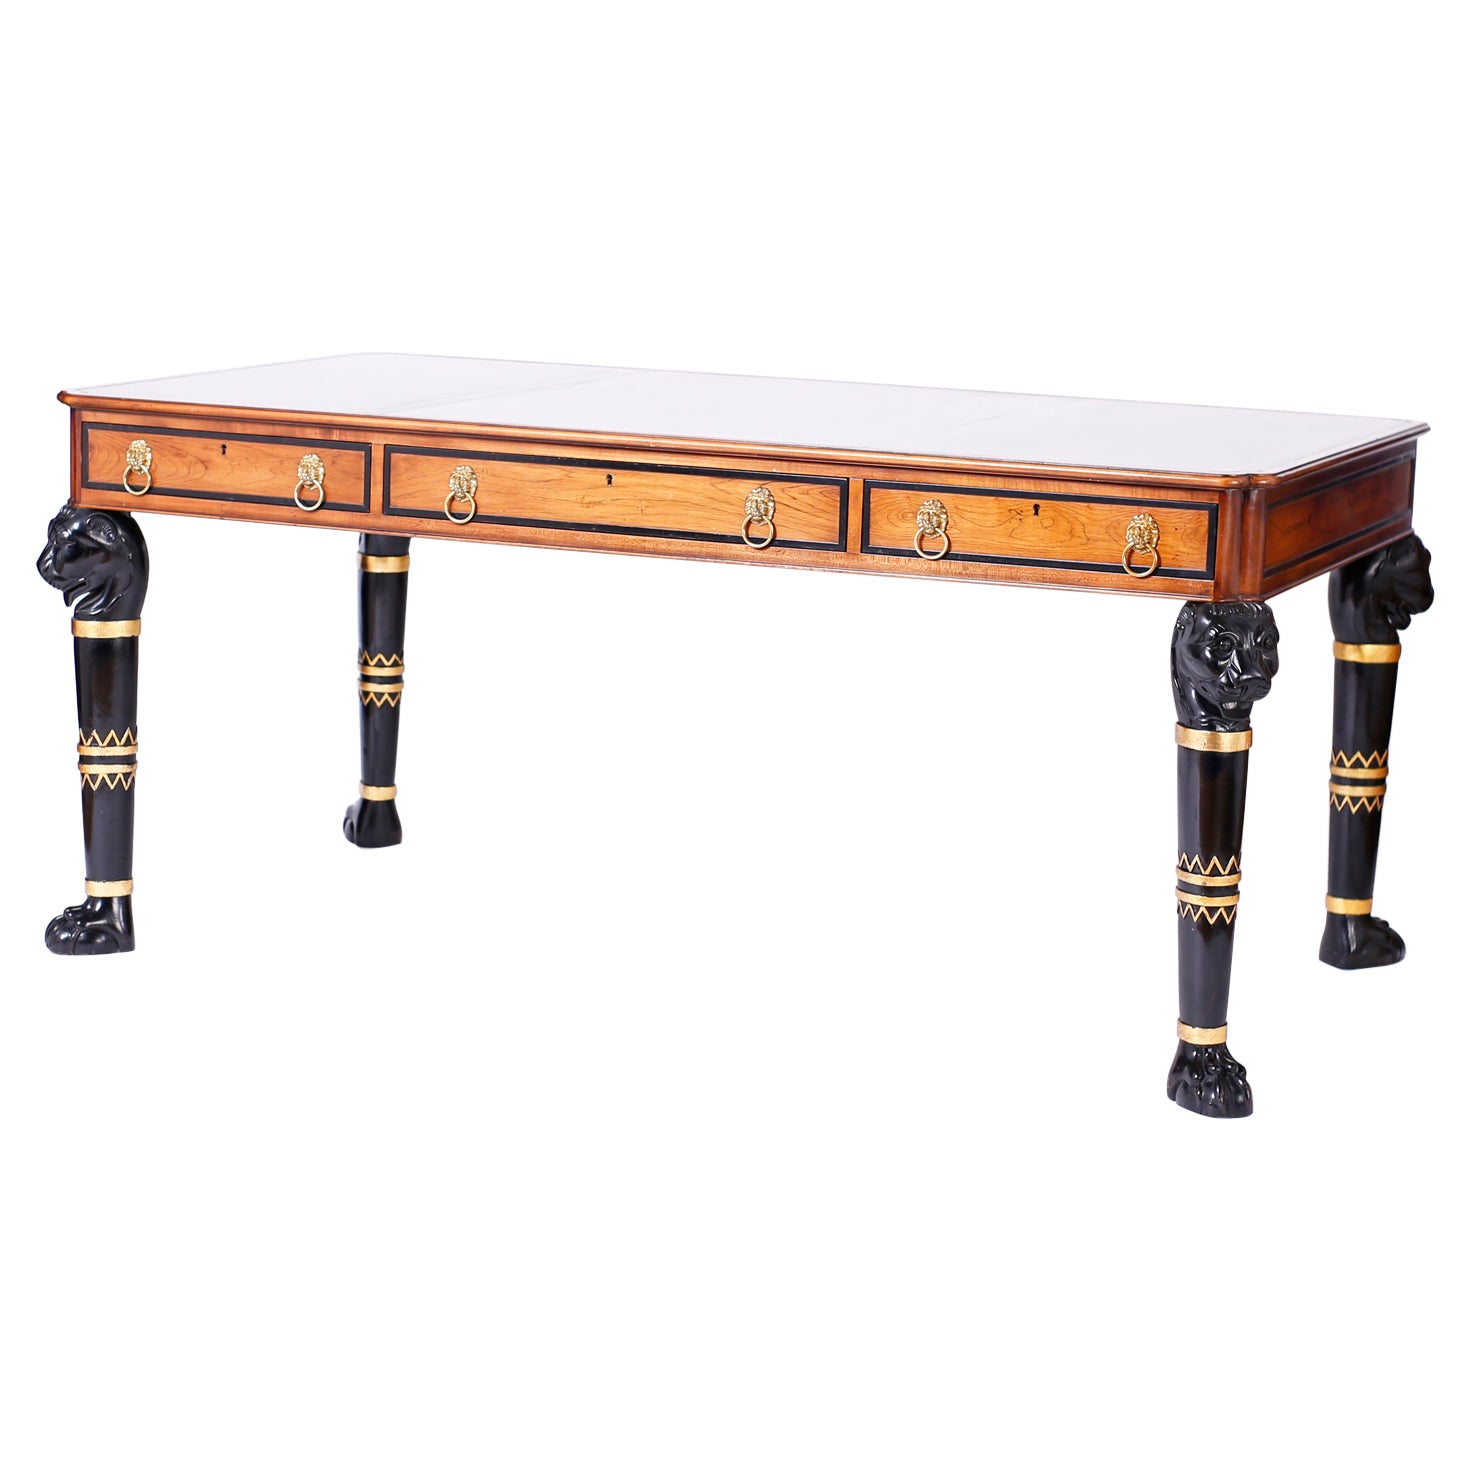 Egyptian Revival Neoclassical Style Leather Top Desk For Sale